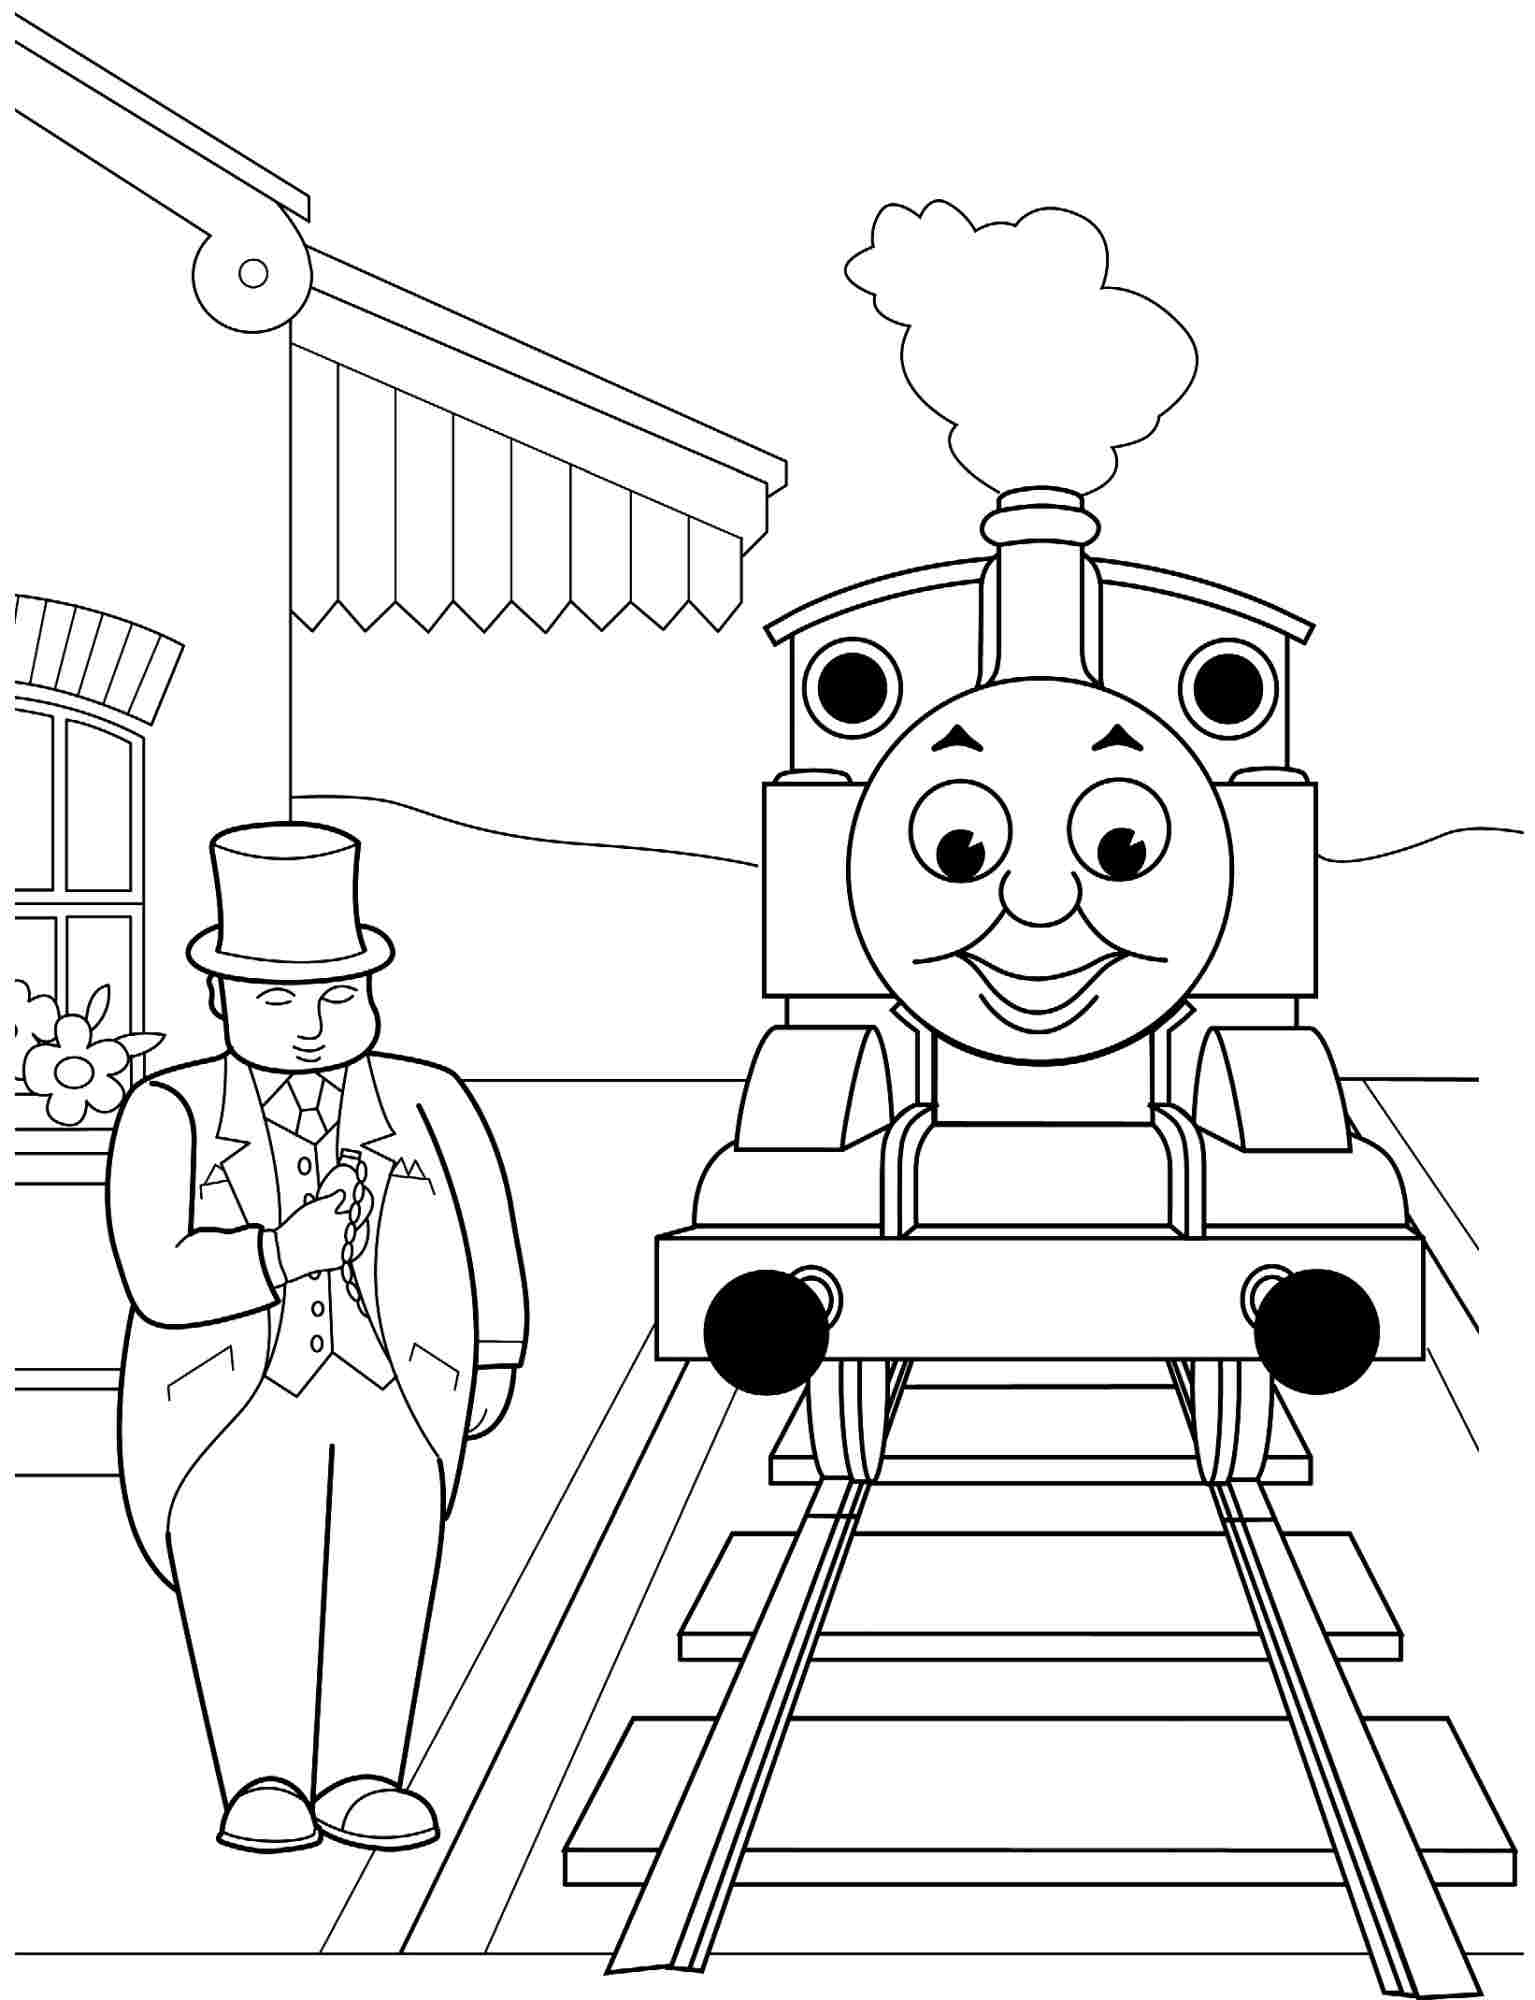 Thomas The Train Coloring Pages at Free printable